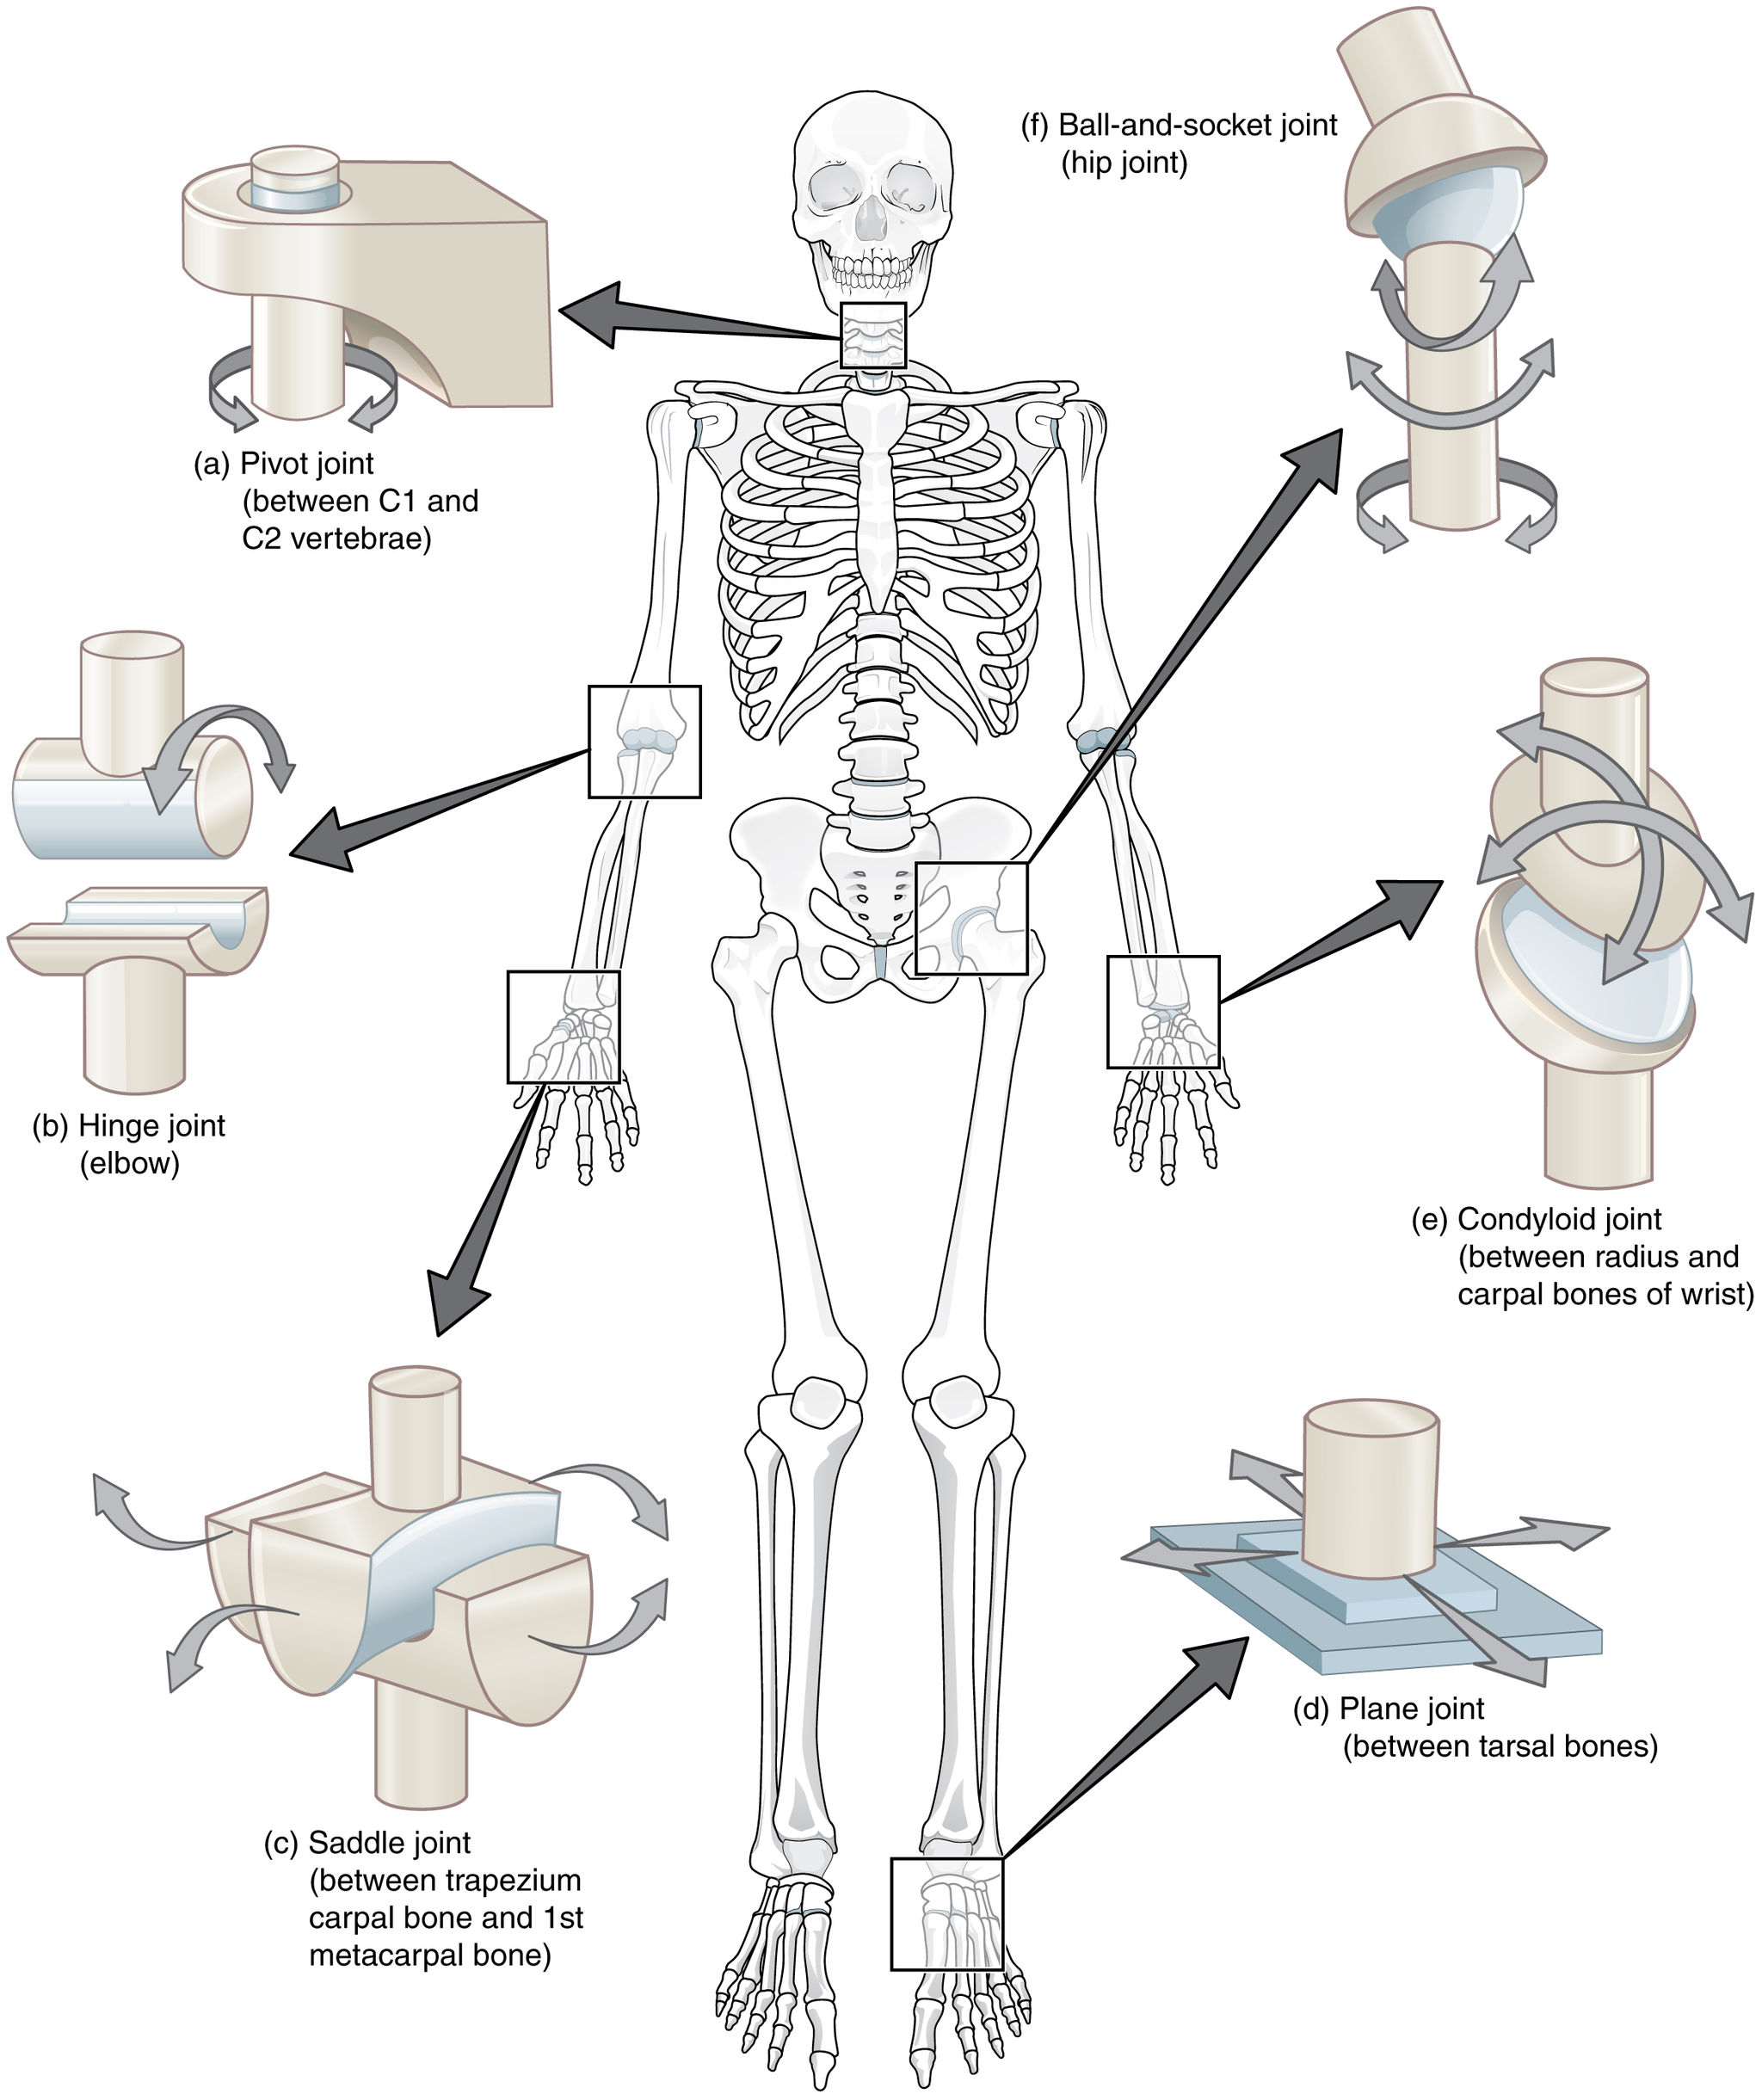 11.6.3 Types of Synovial Joints